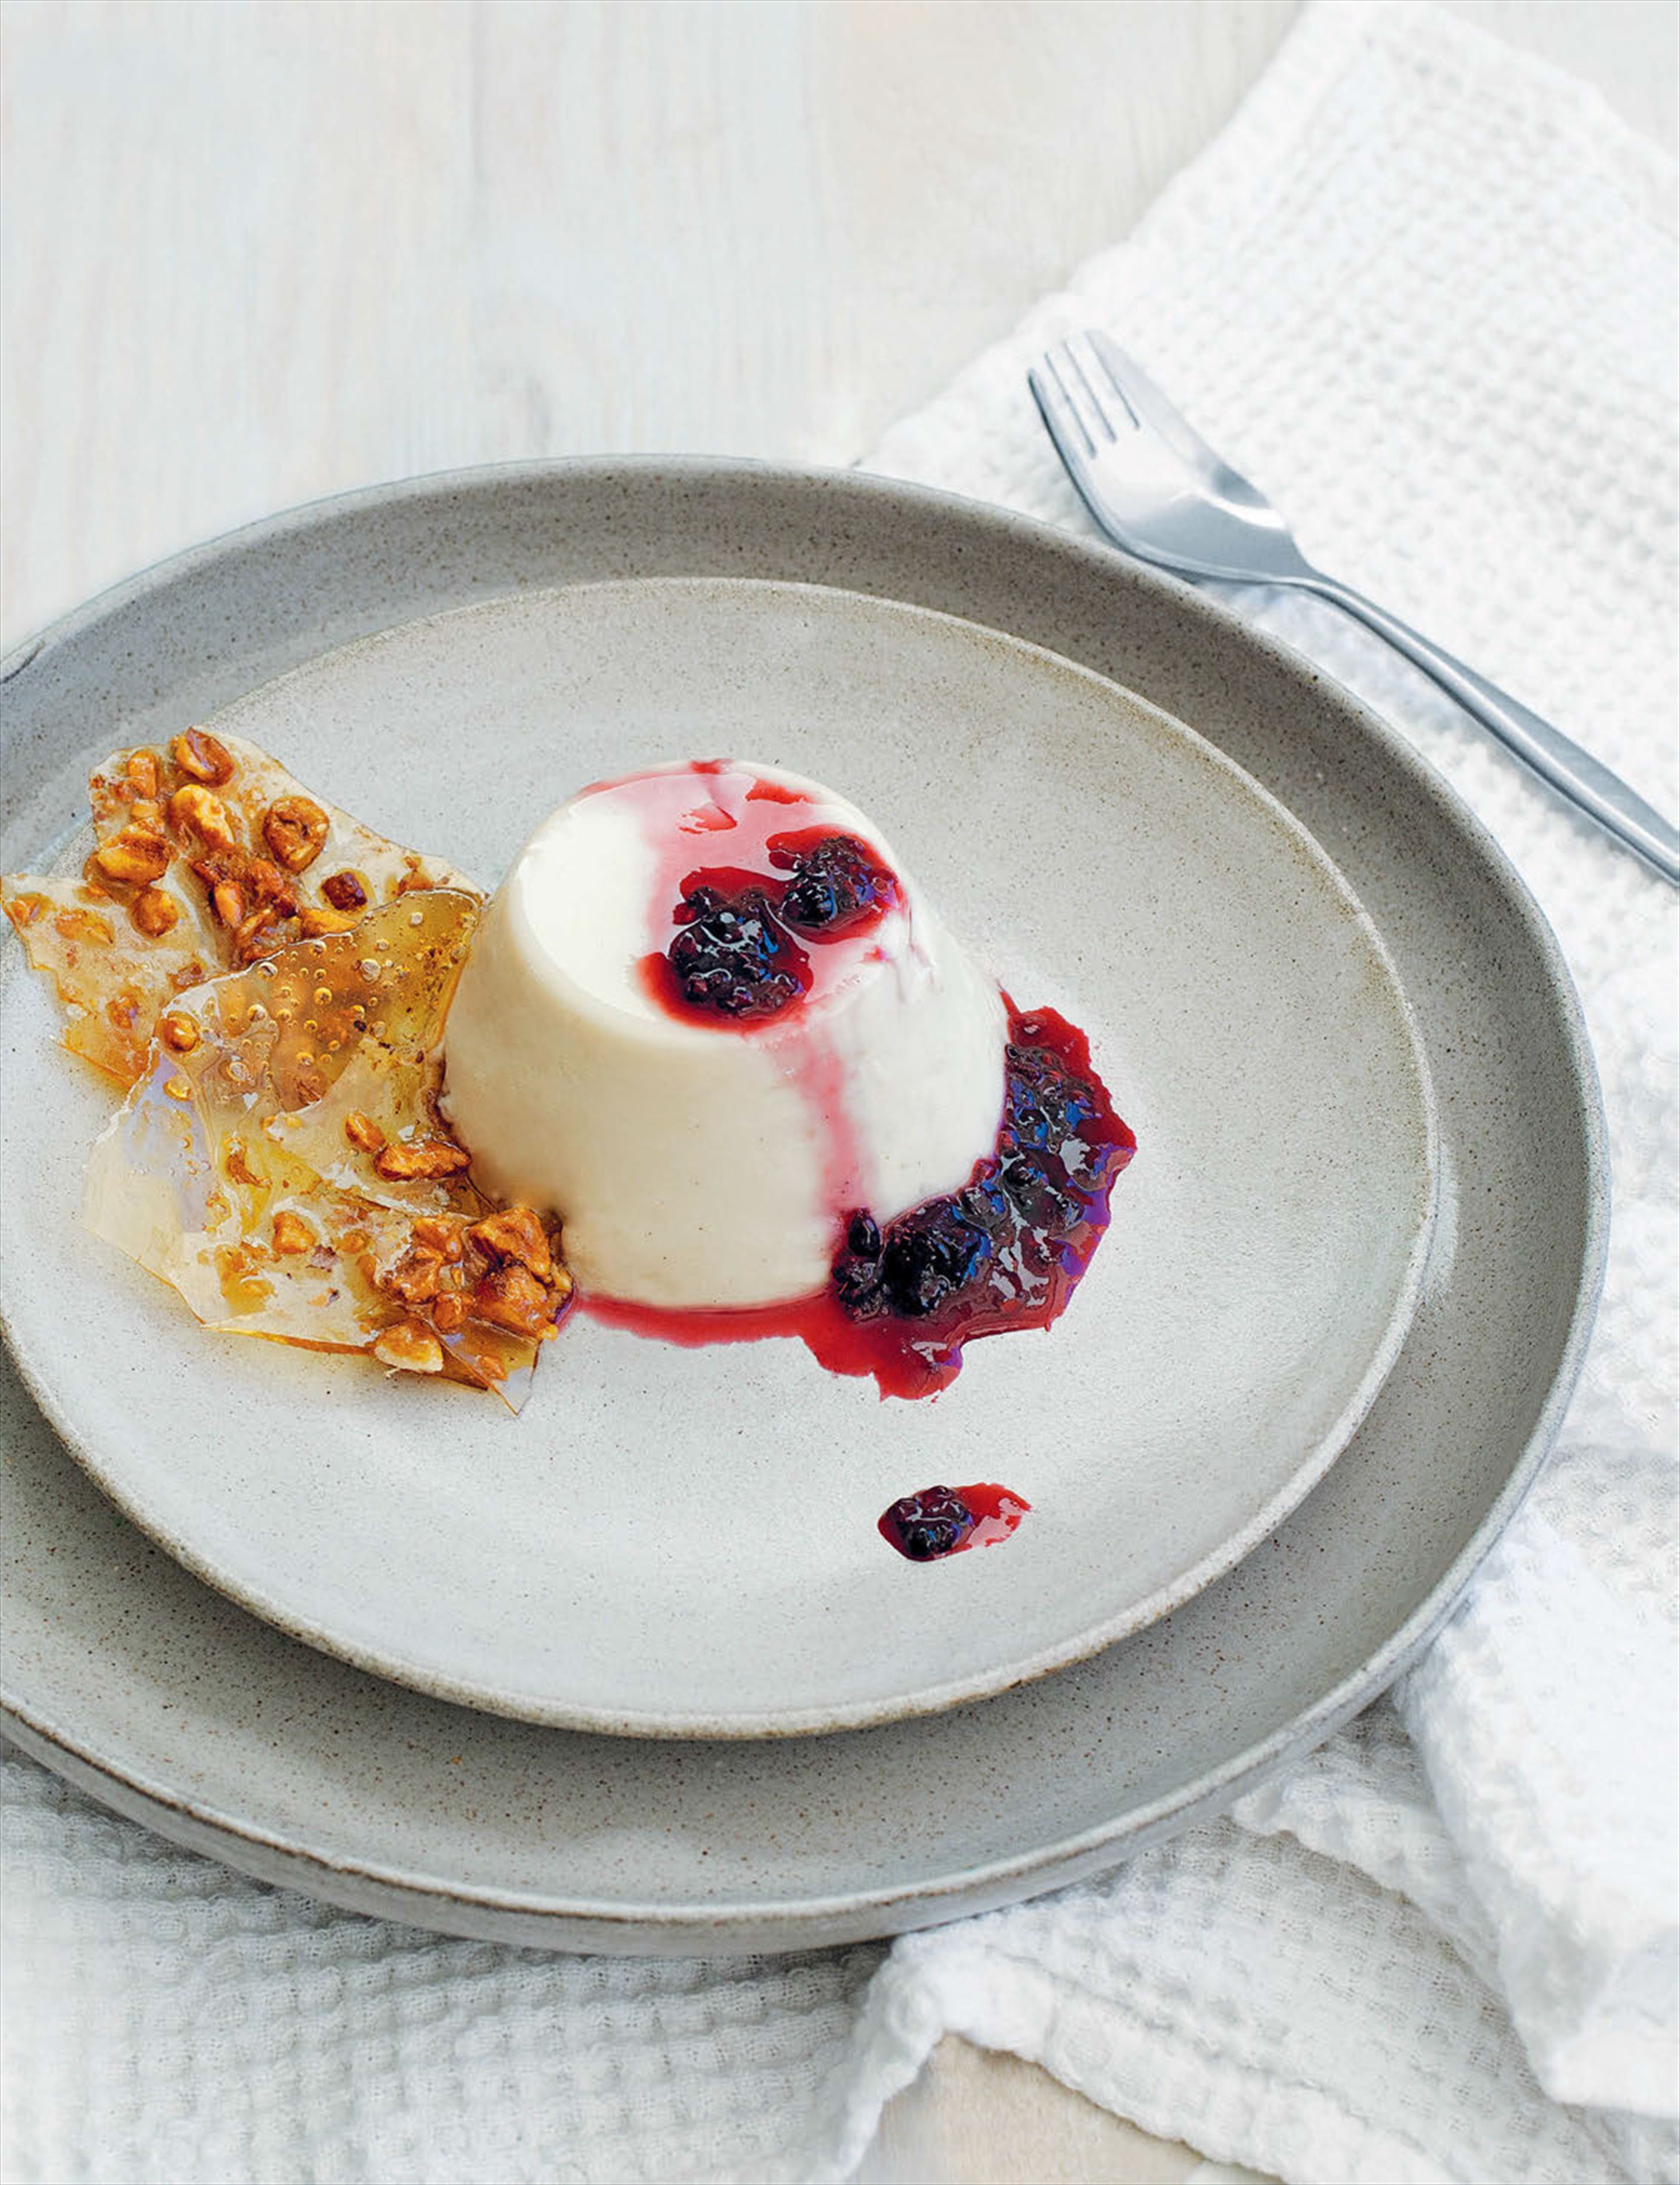 Panna cotta with almond brittle and berry sauce